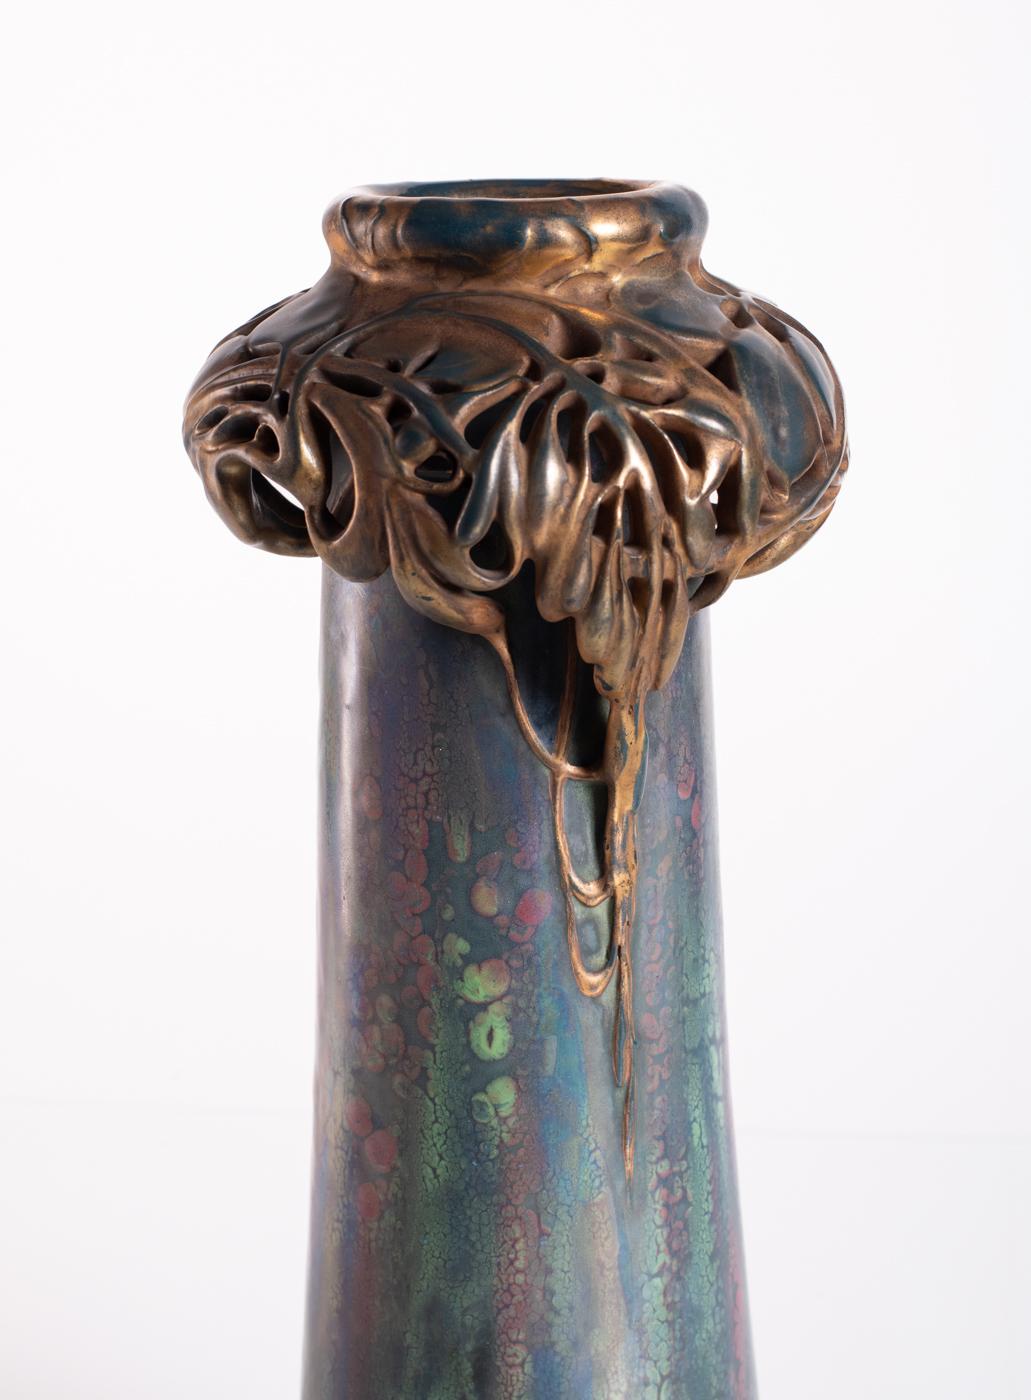 Floral Wreath Vase by Paul Dachsel for Amphora c. 1900 For Sale 3